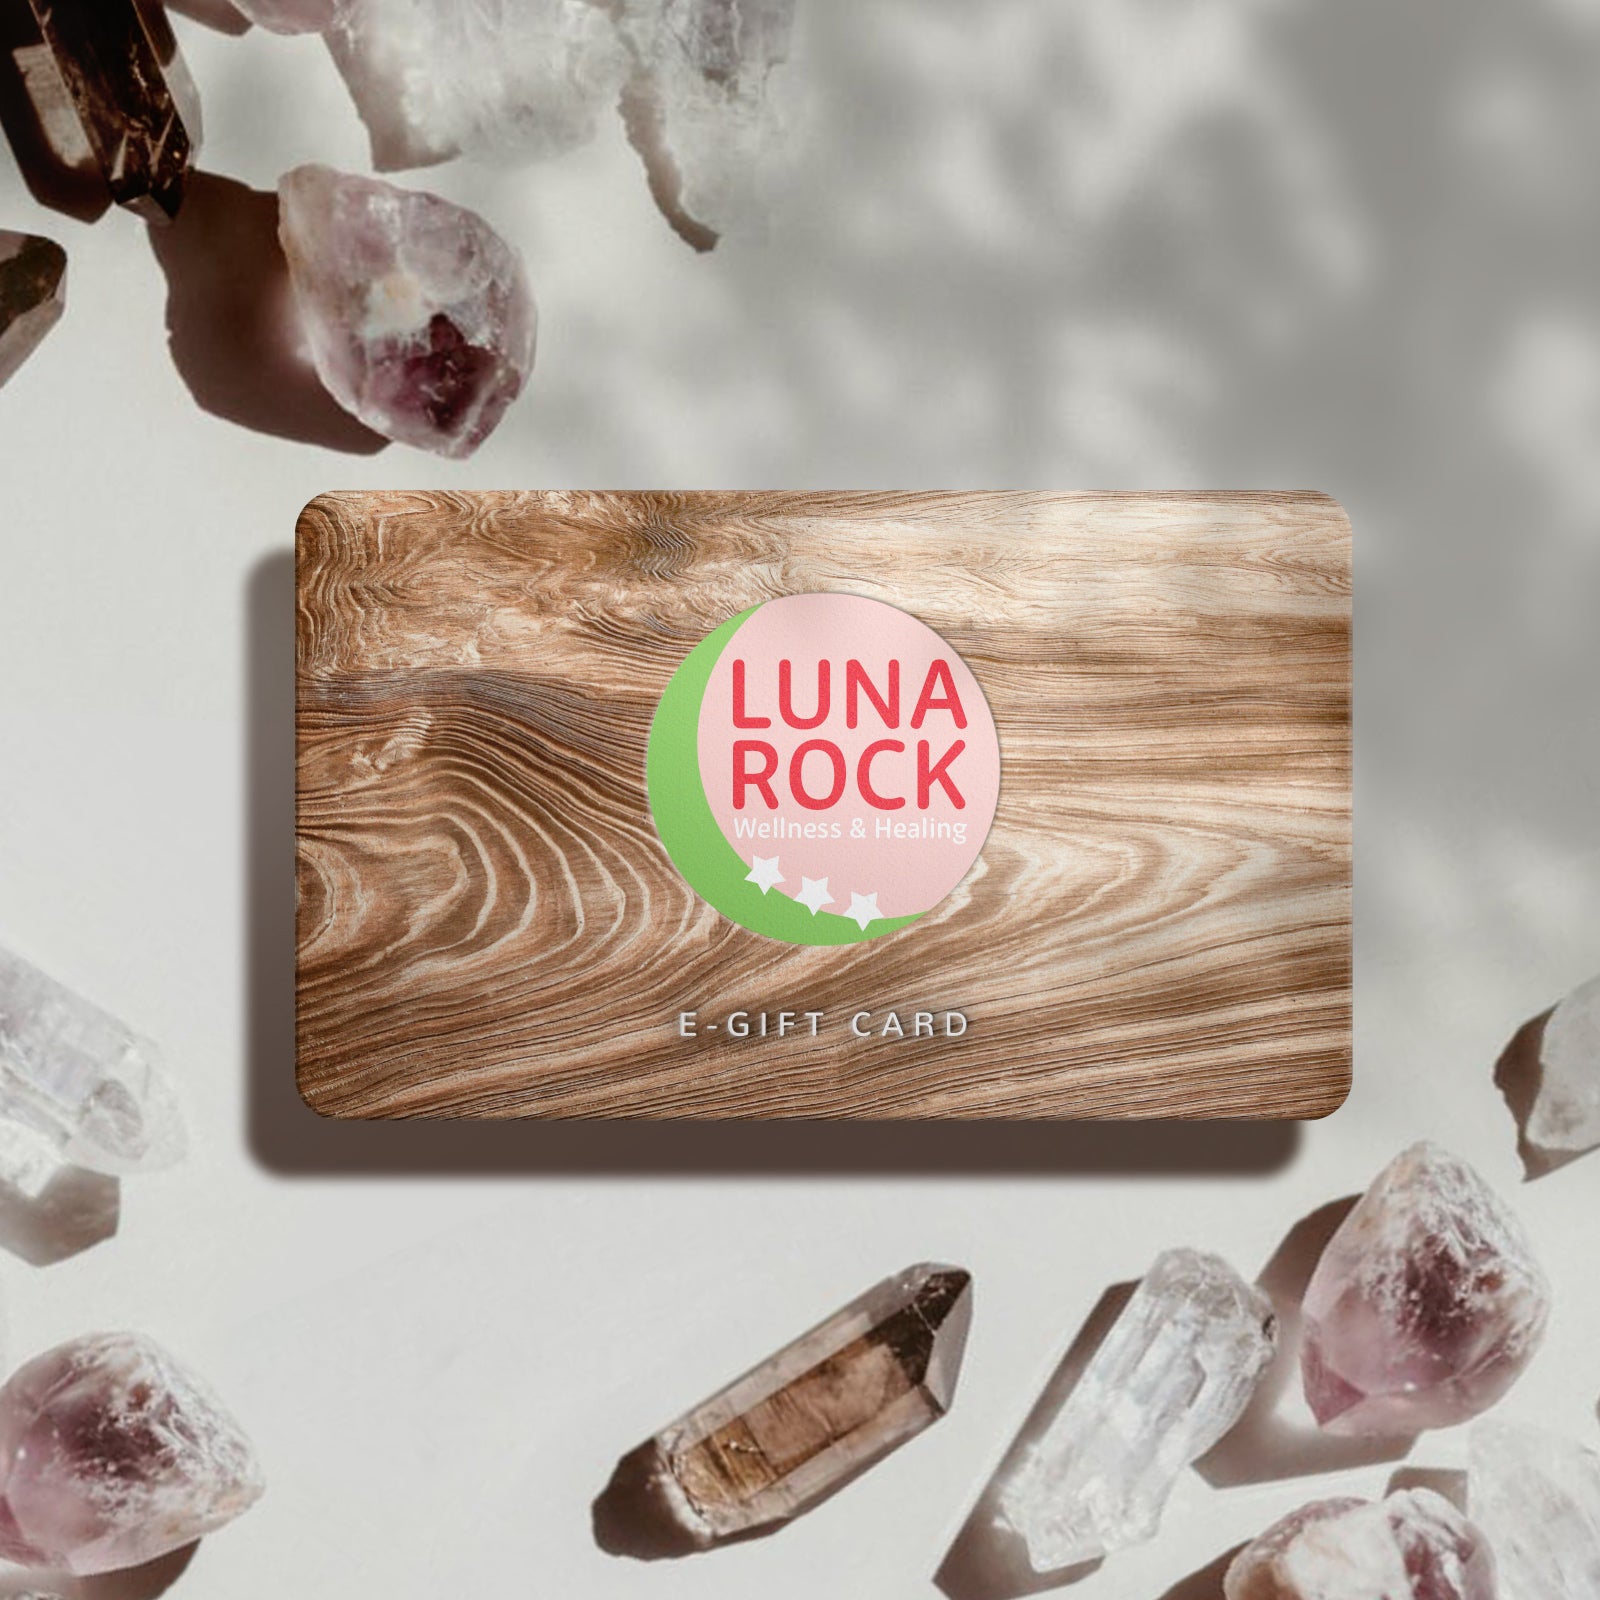 Treat your special person with the ultimate gift of relaxation, health, wellness and inner peace with Luna Rock Wellness & Healing.  Based in central Cheltenham